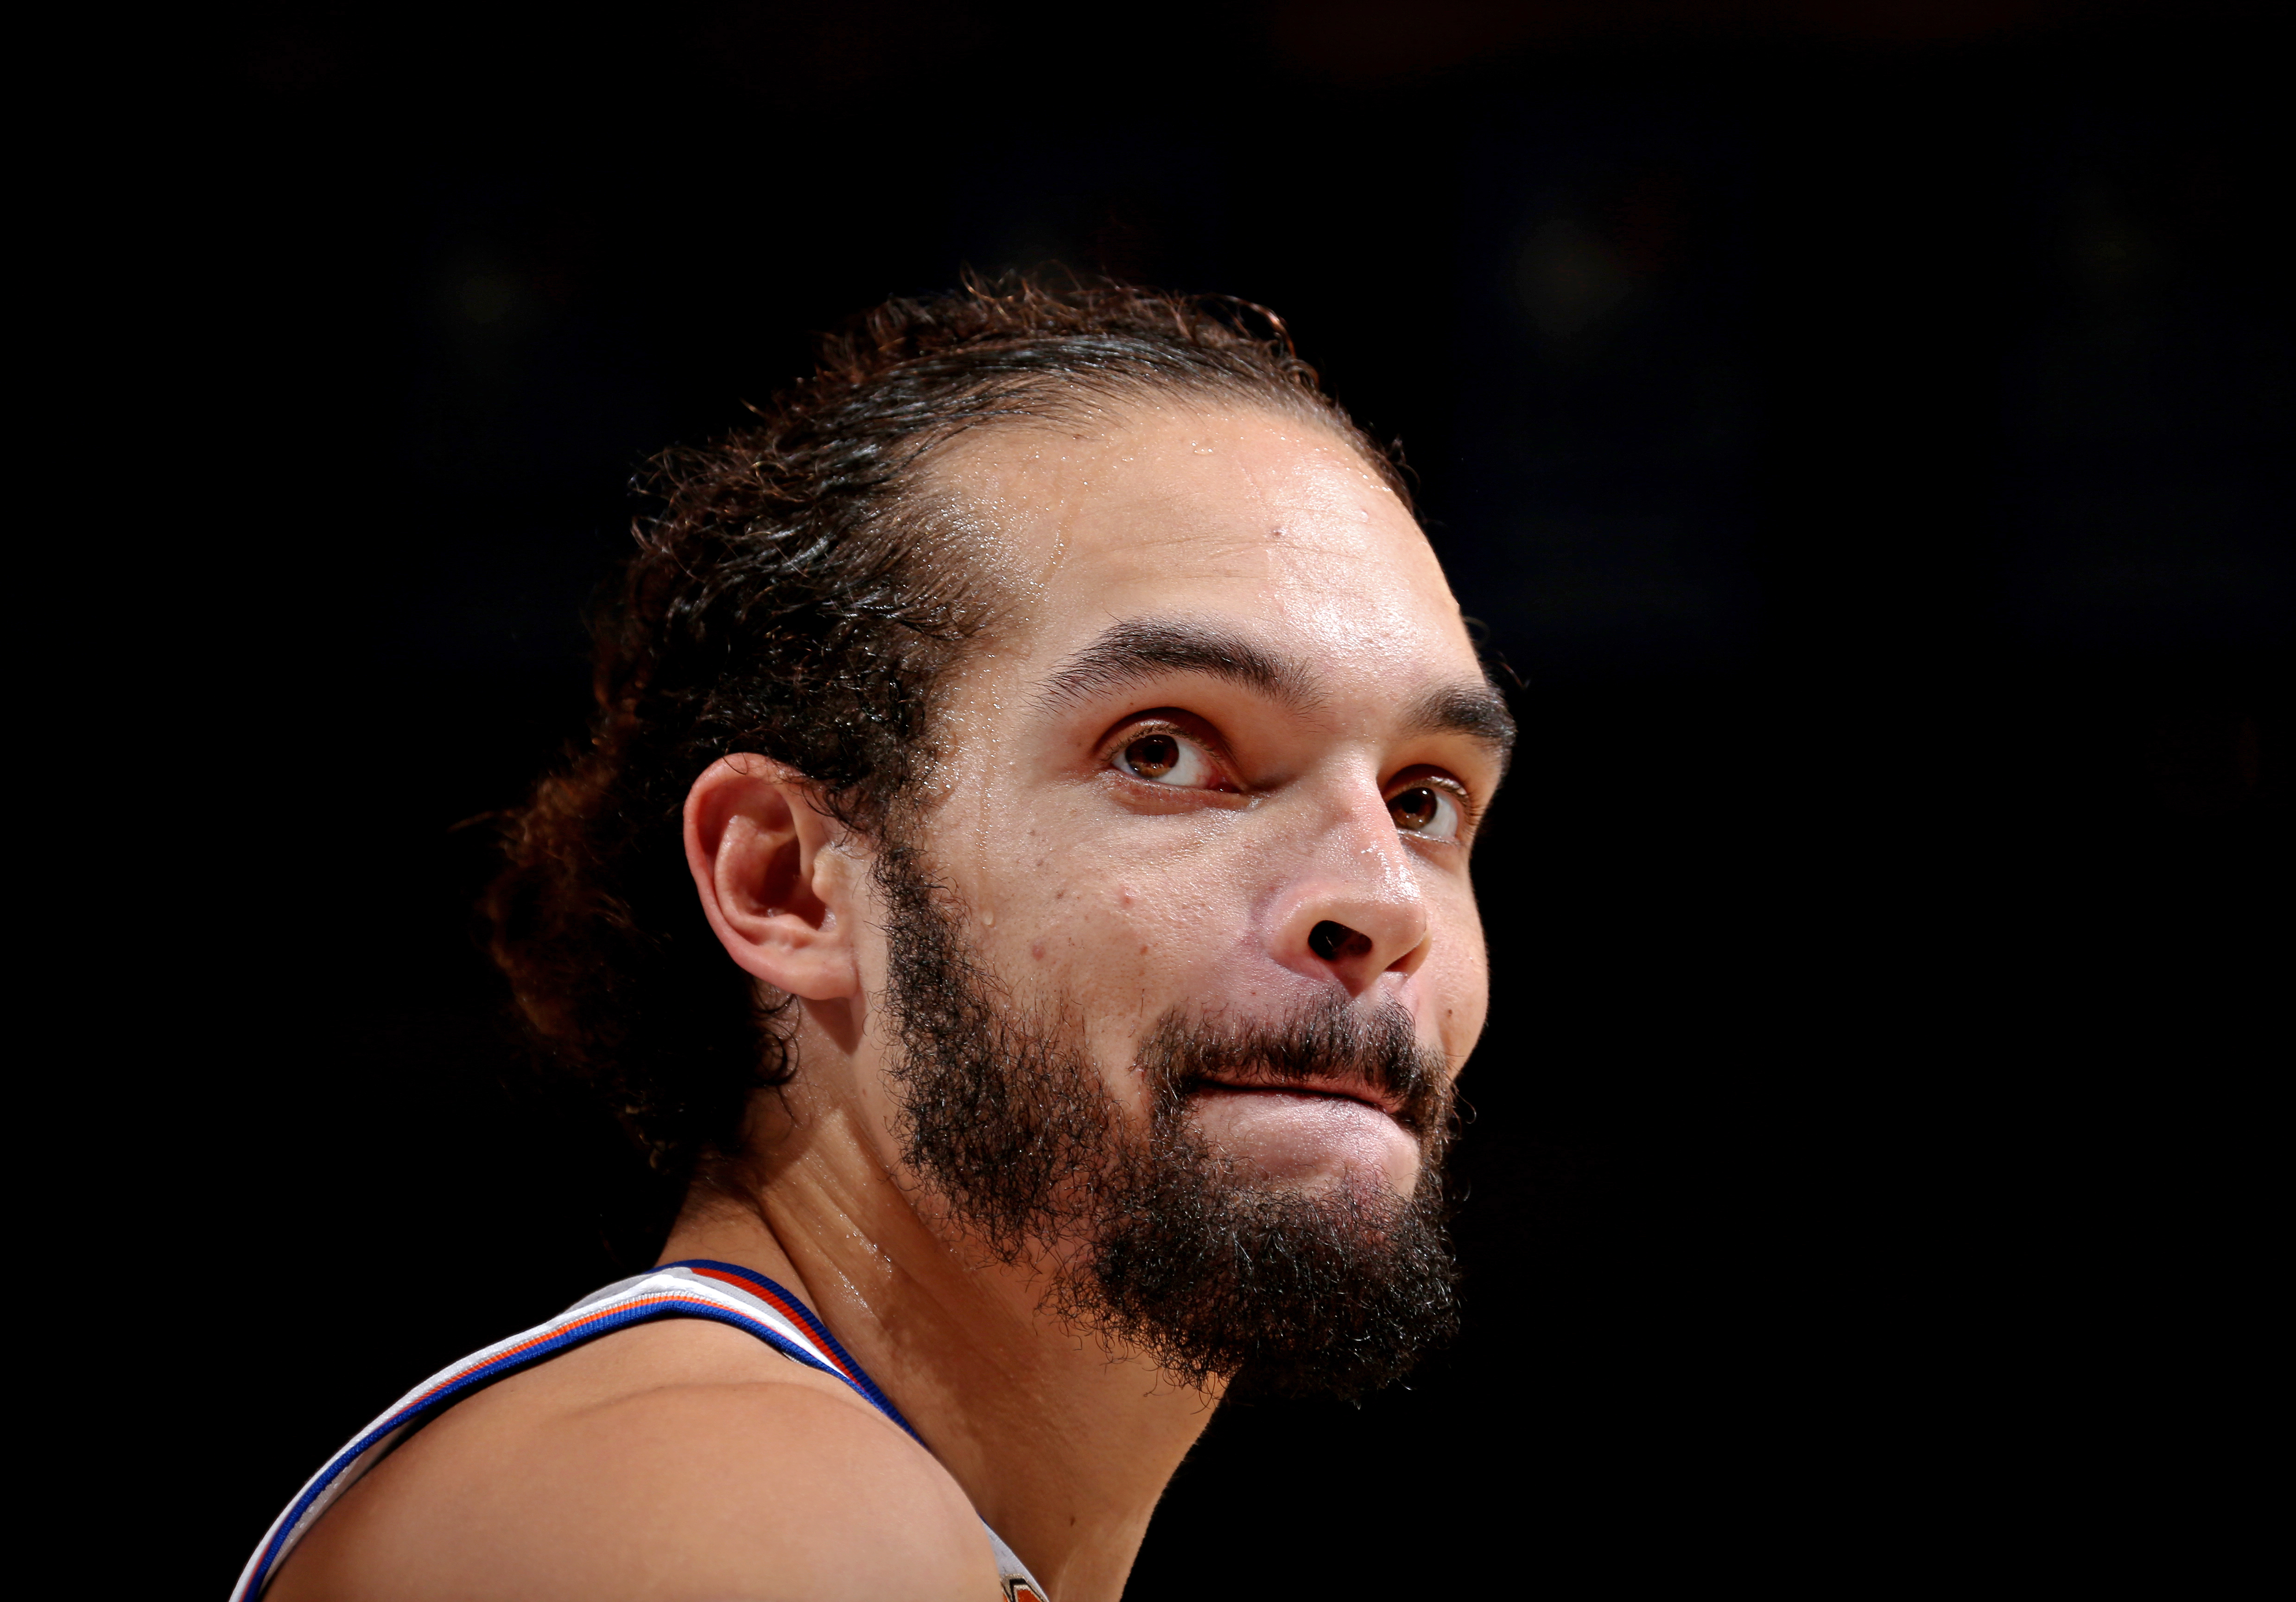 NEW YORK CITY - NOVEMBER 25: A close up shot of Joakim Noah #13 of the New York Knicks during the game against the Charlotte Hornets at Madison Square Garden in New York, New York. NOTE TO USER: User expressly acknowledges and agrees that, by downloading and/or using this Photograph, user is consenting to the terms and conditions of the Getty Images License Agreement. Mandatory Copyright Notice: Copyright 2016 NBAE (Photo by Nathaniel S. Butler/NBAE via Getty Images)